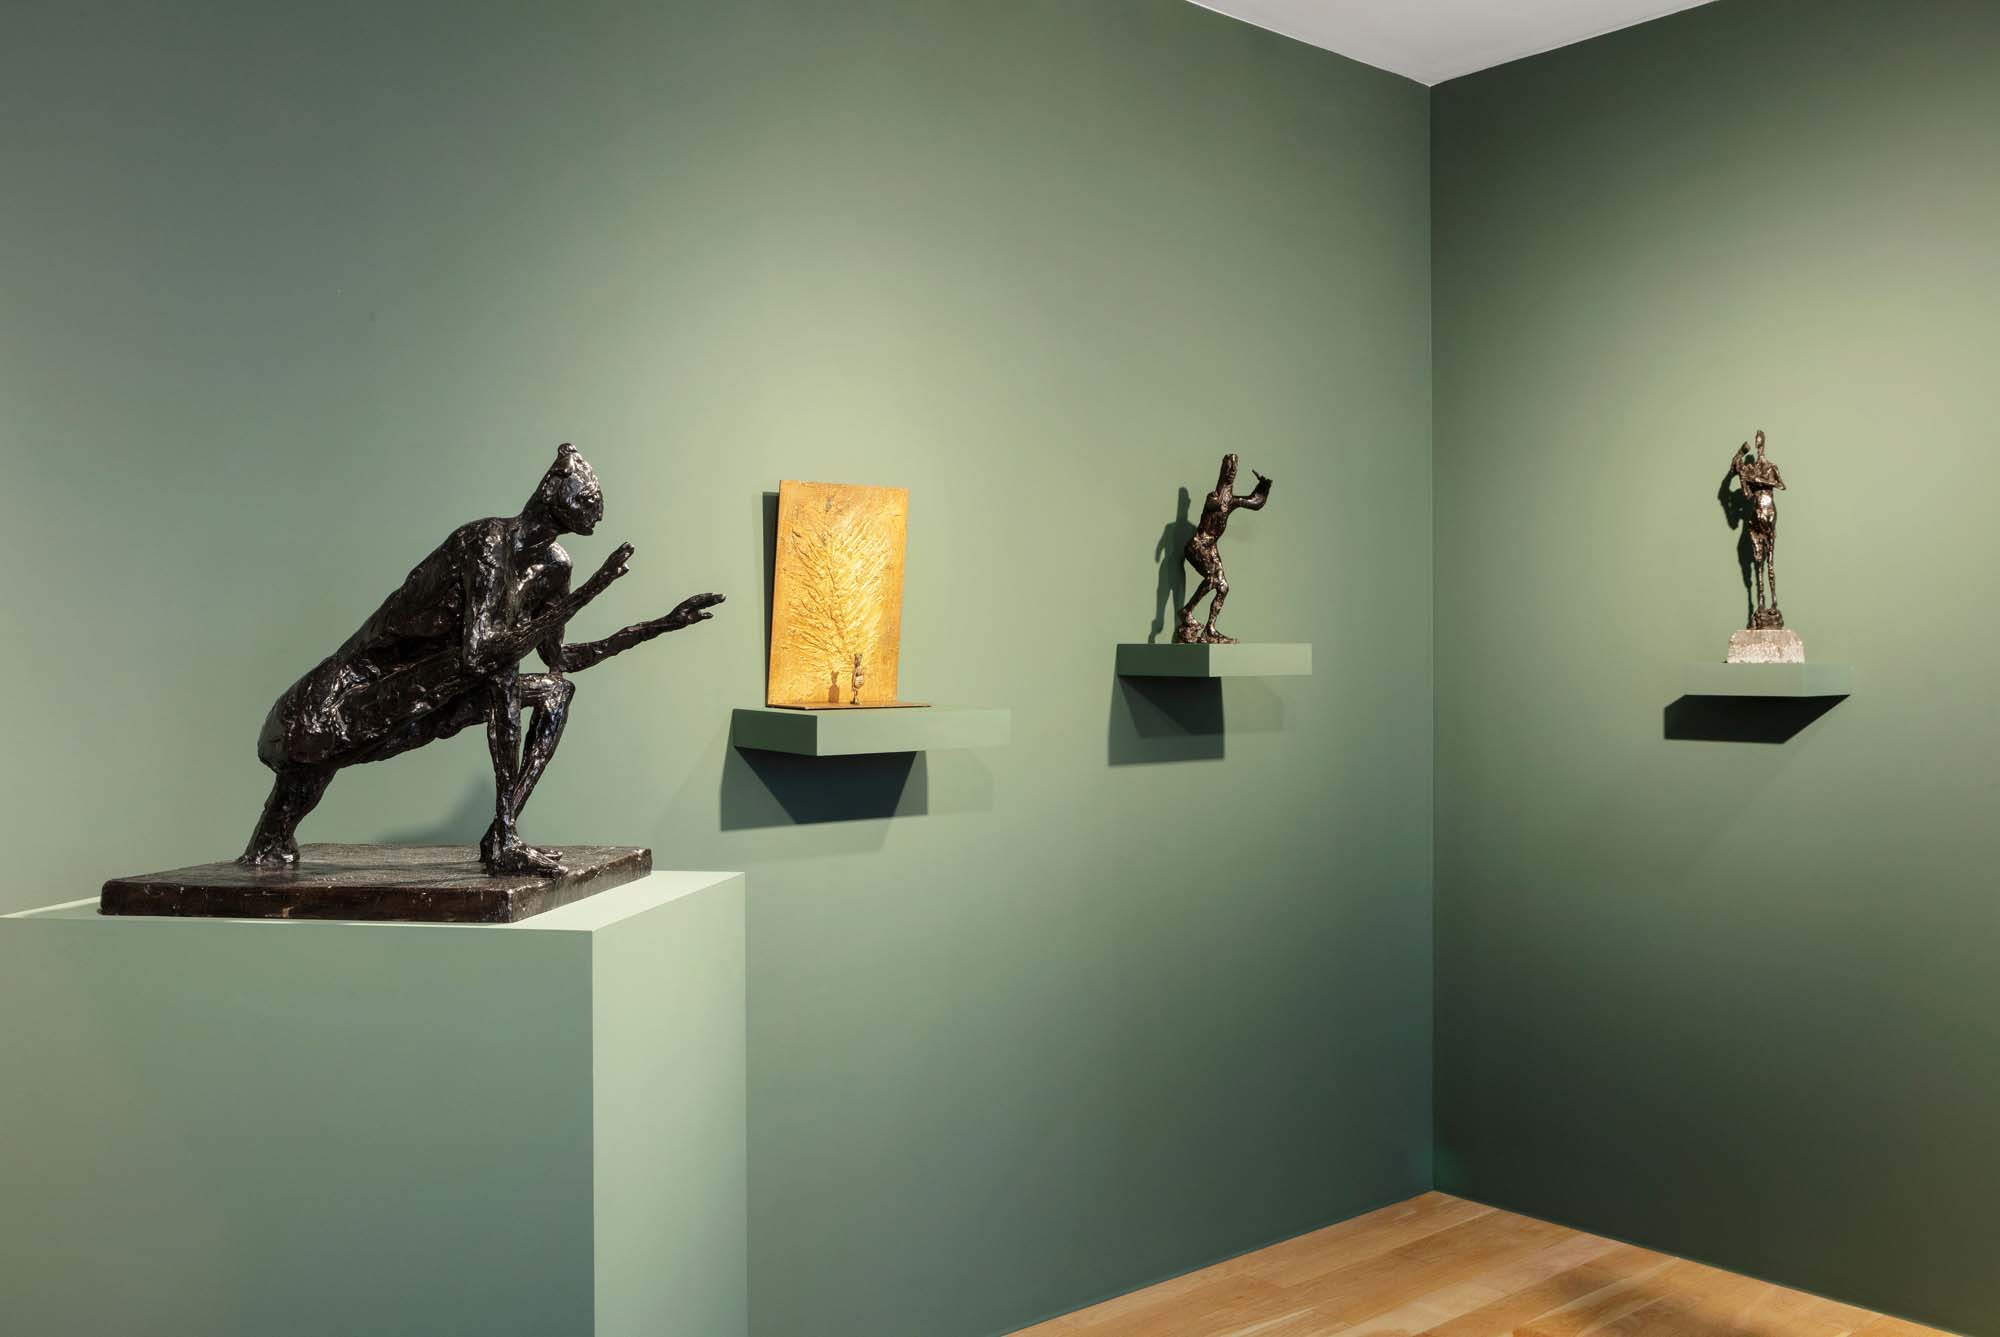 Installation image for Germaine Richier, at Perrotin